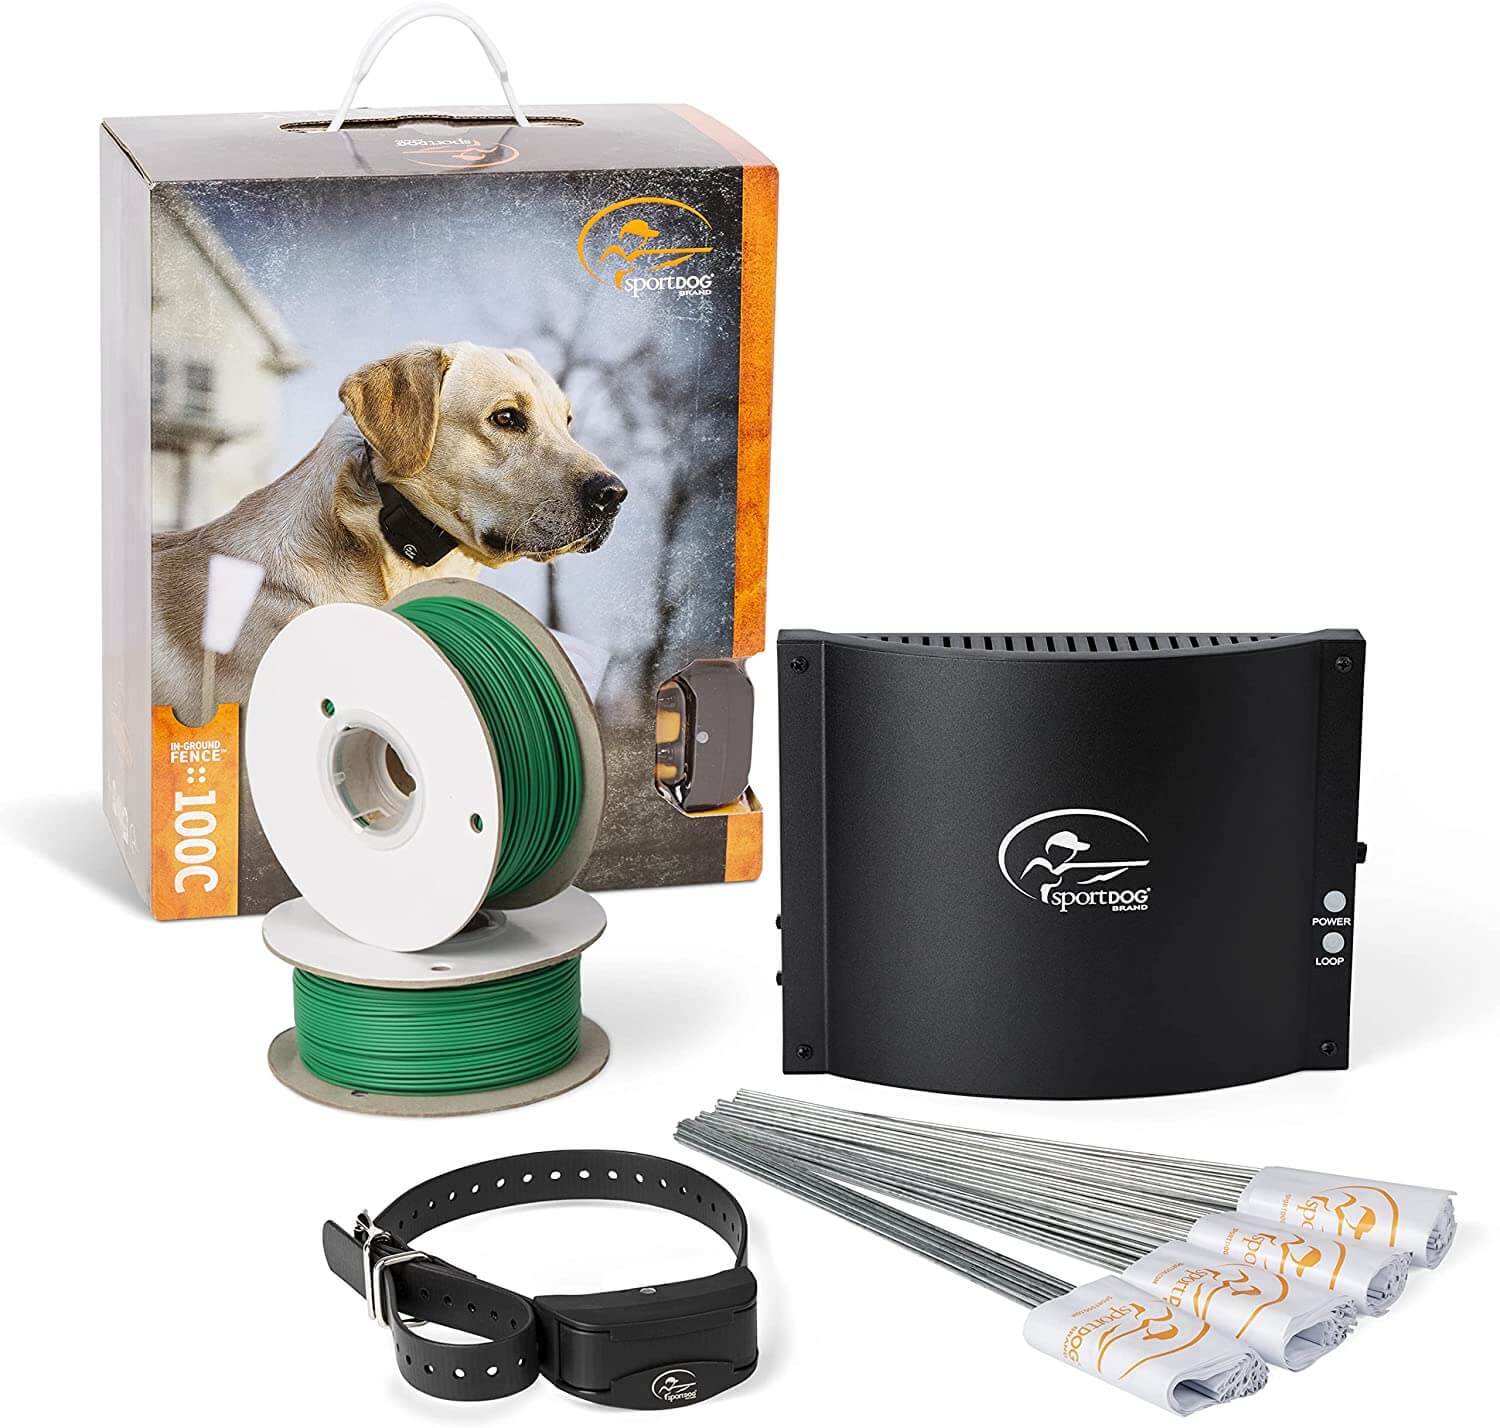 Top 5 Best Electric Dog Fences For Your Pet, Ranked - Study Finds